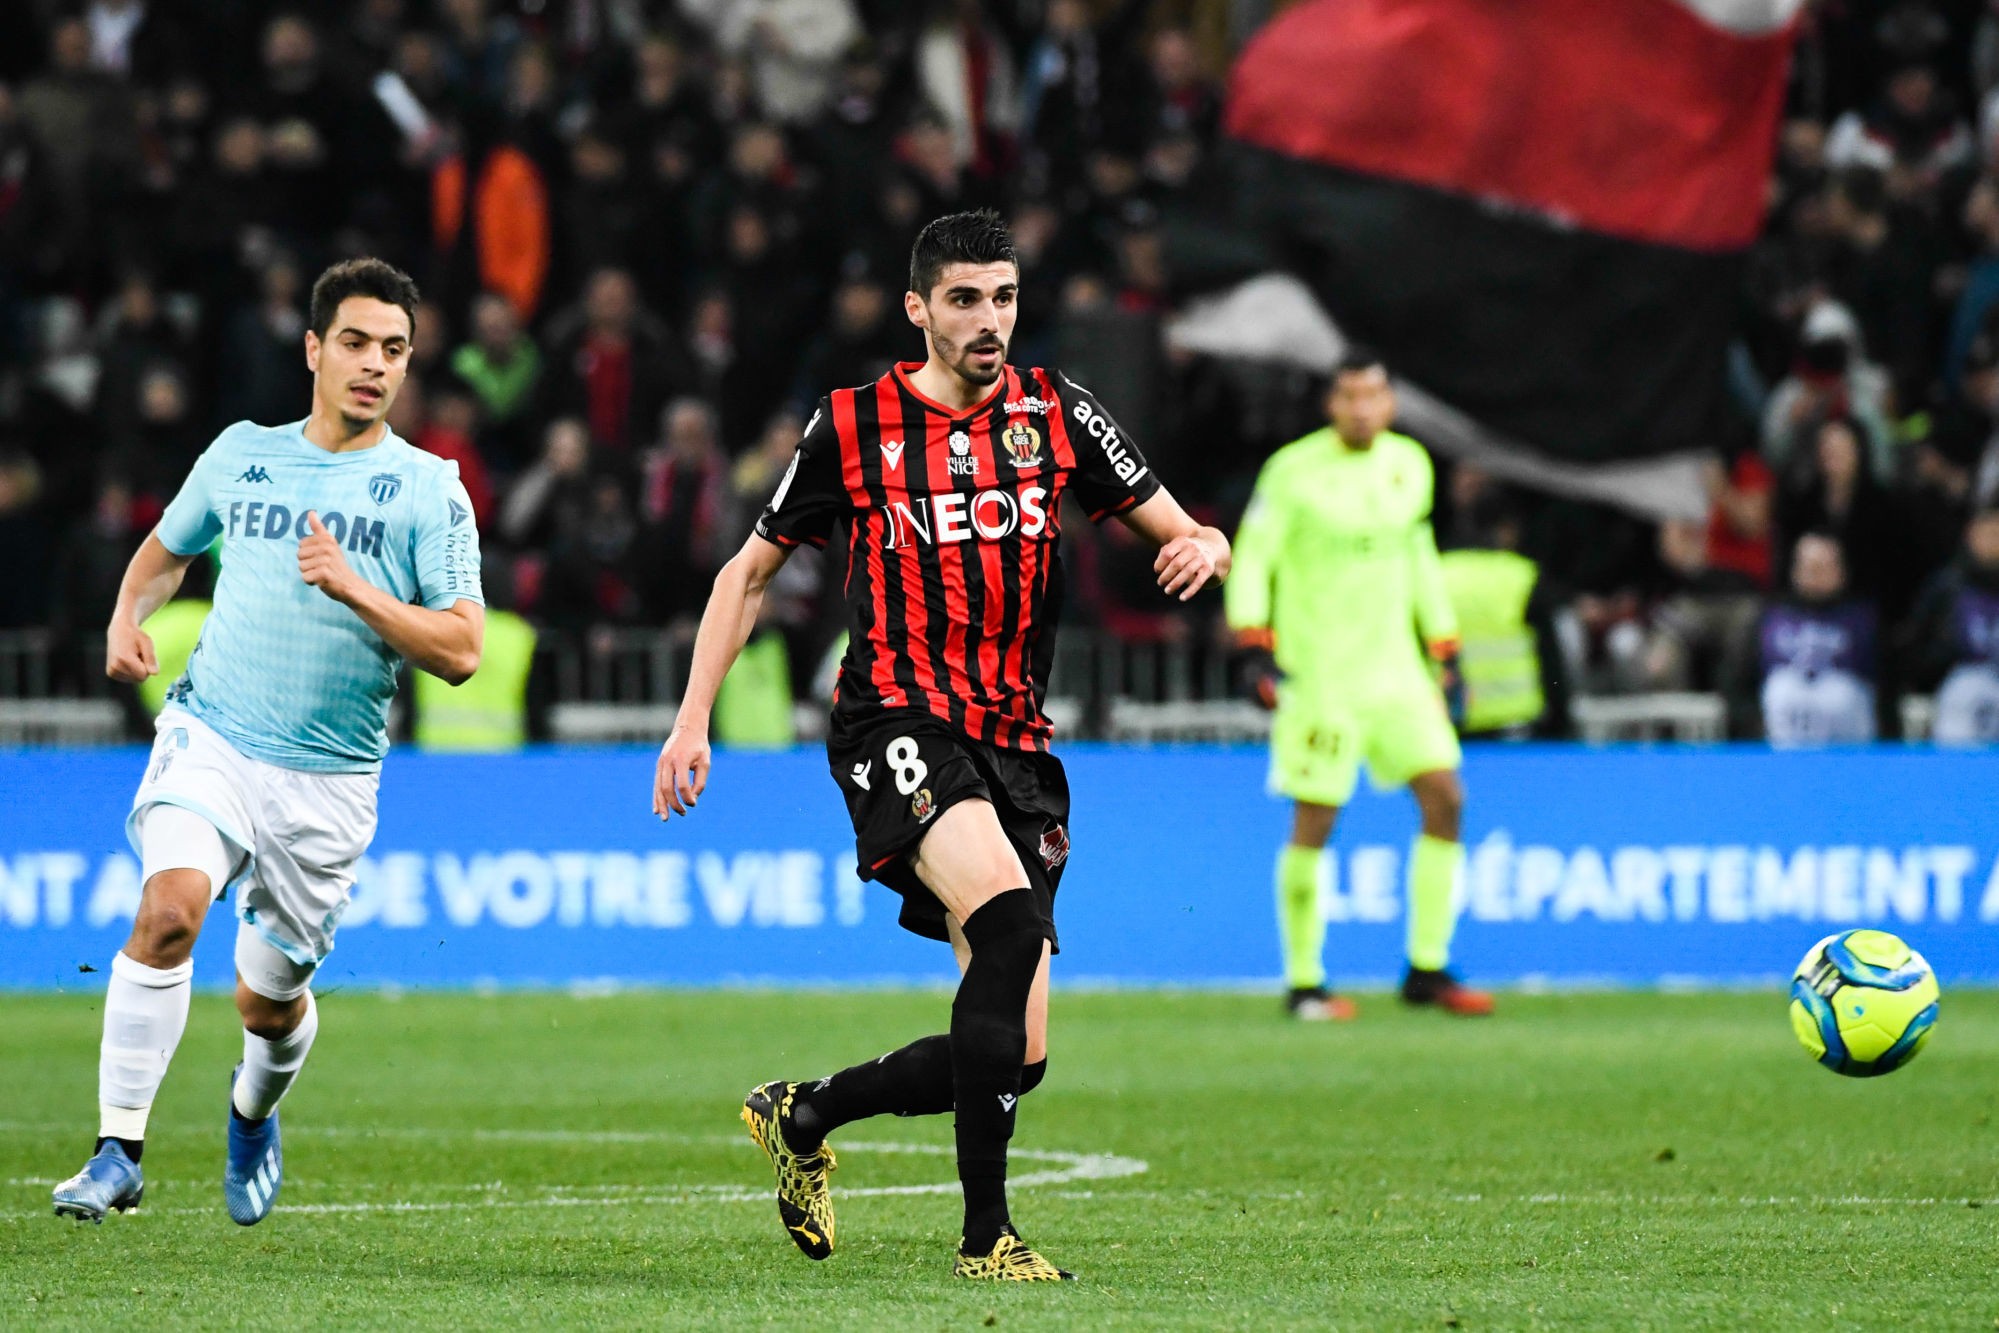 Pierre LEES-MELOU of Nice and Wissam BEN YEDDER of Monaco during the Ligue 1 match between Nice and Monaco at Allianz Riviera on March 7, 2020 in Nice, France. (Photo by Pascal Della Zuana/Icon Sport) - Pierre LEES-MELOU - Wissam BEN YEDDER - Allianz Riviera - Nice (France)